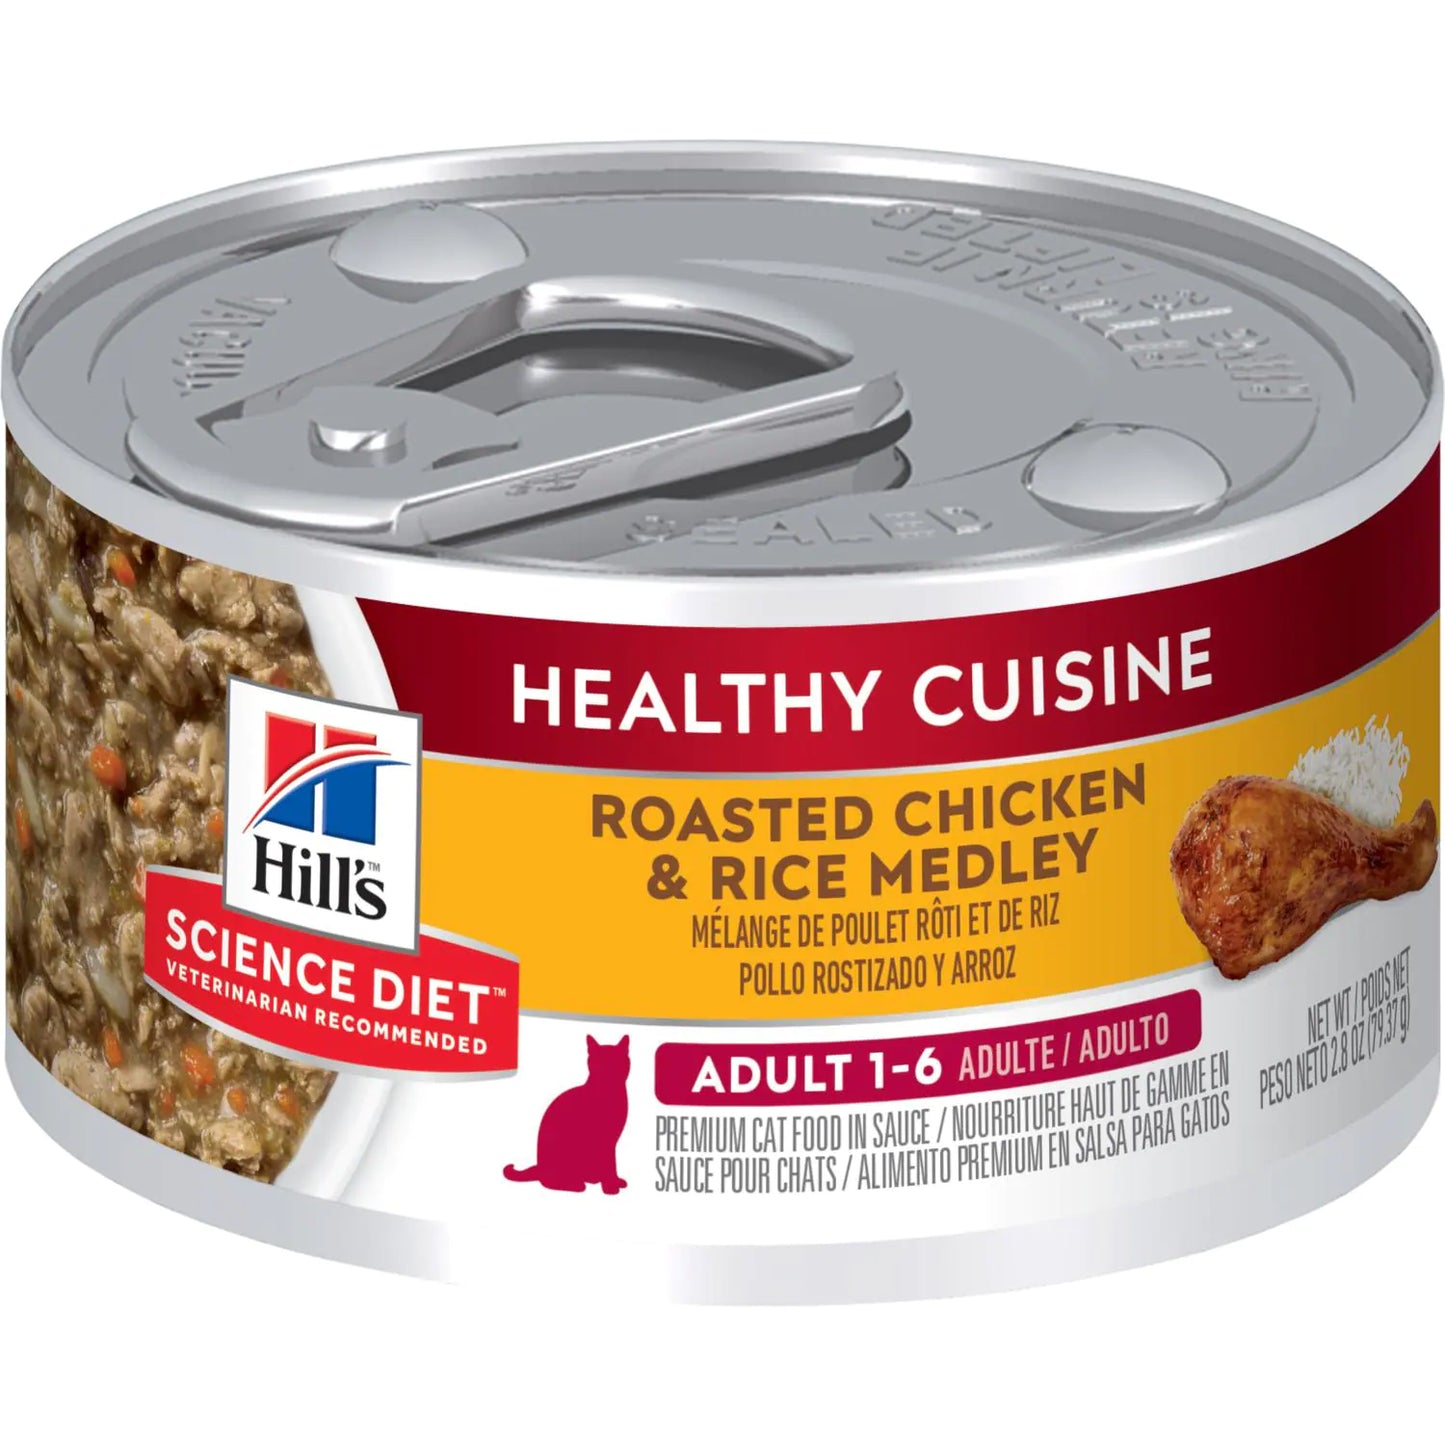 Hill's Science Diet Adult Healthy Cuisine Roasted Chicken & Rice Medley cat food